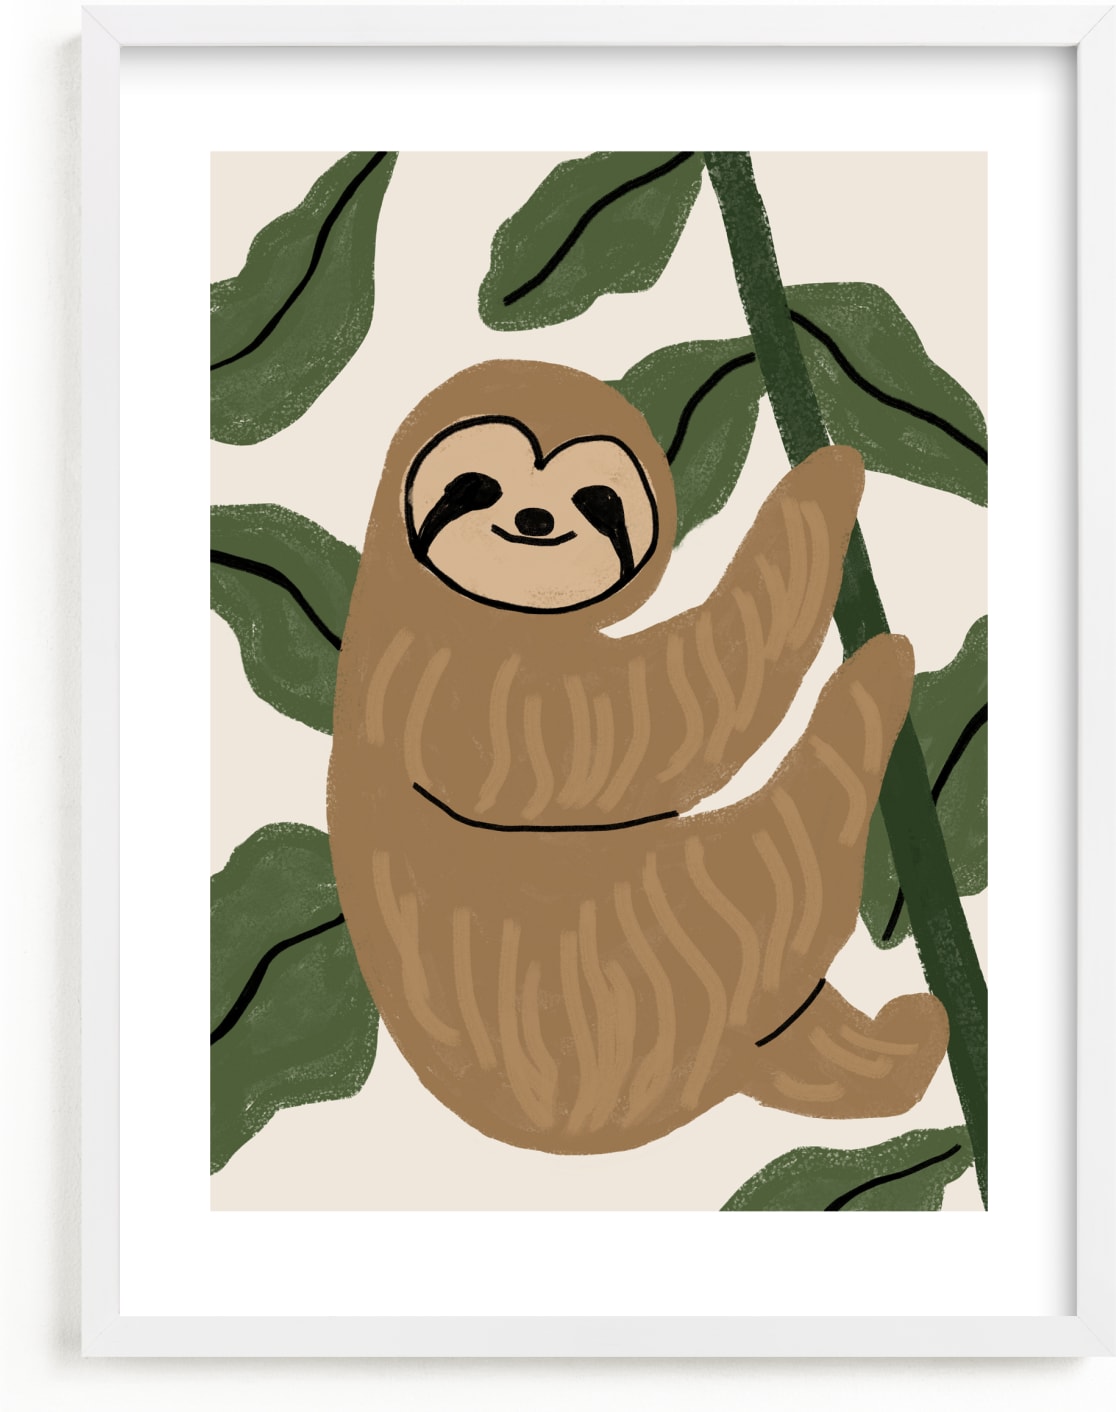 This is a brown, green art by Cass Loh called Baby sloth.